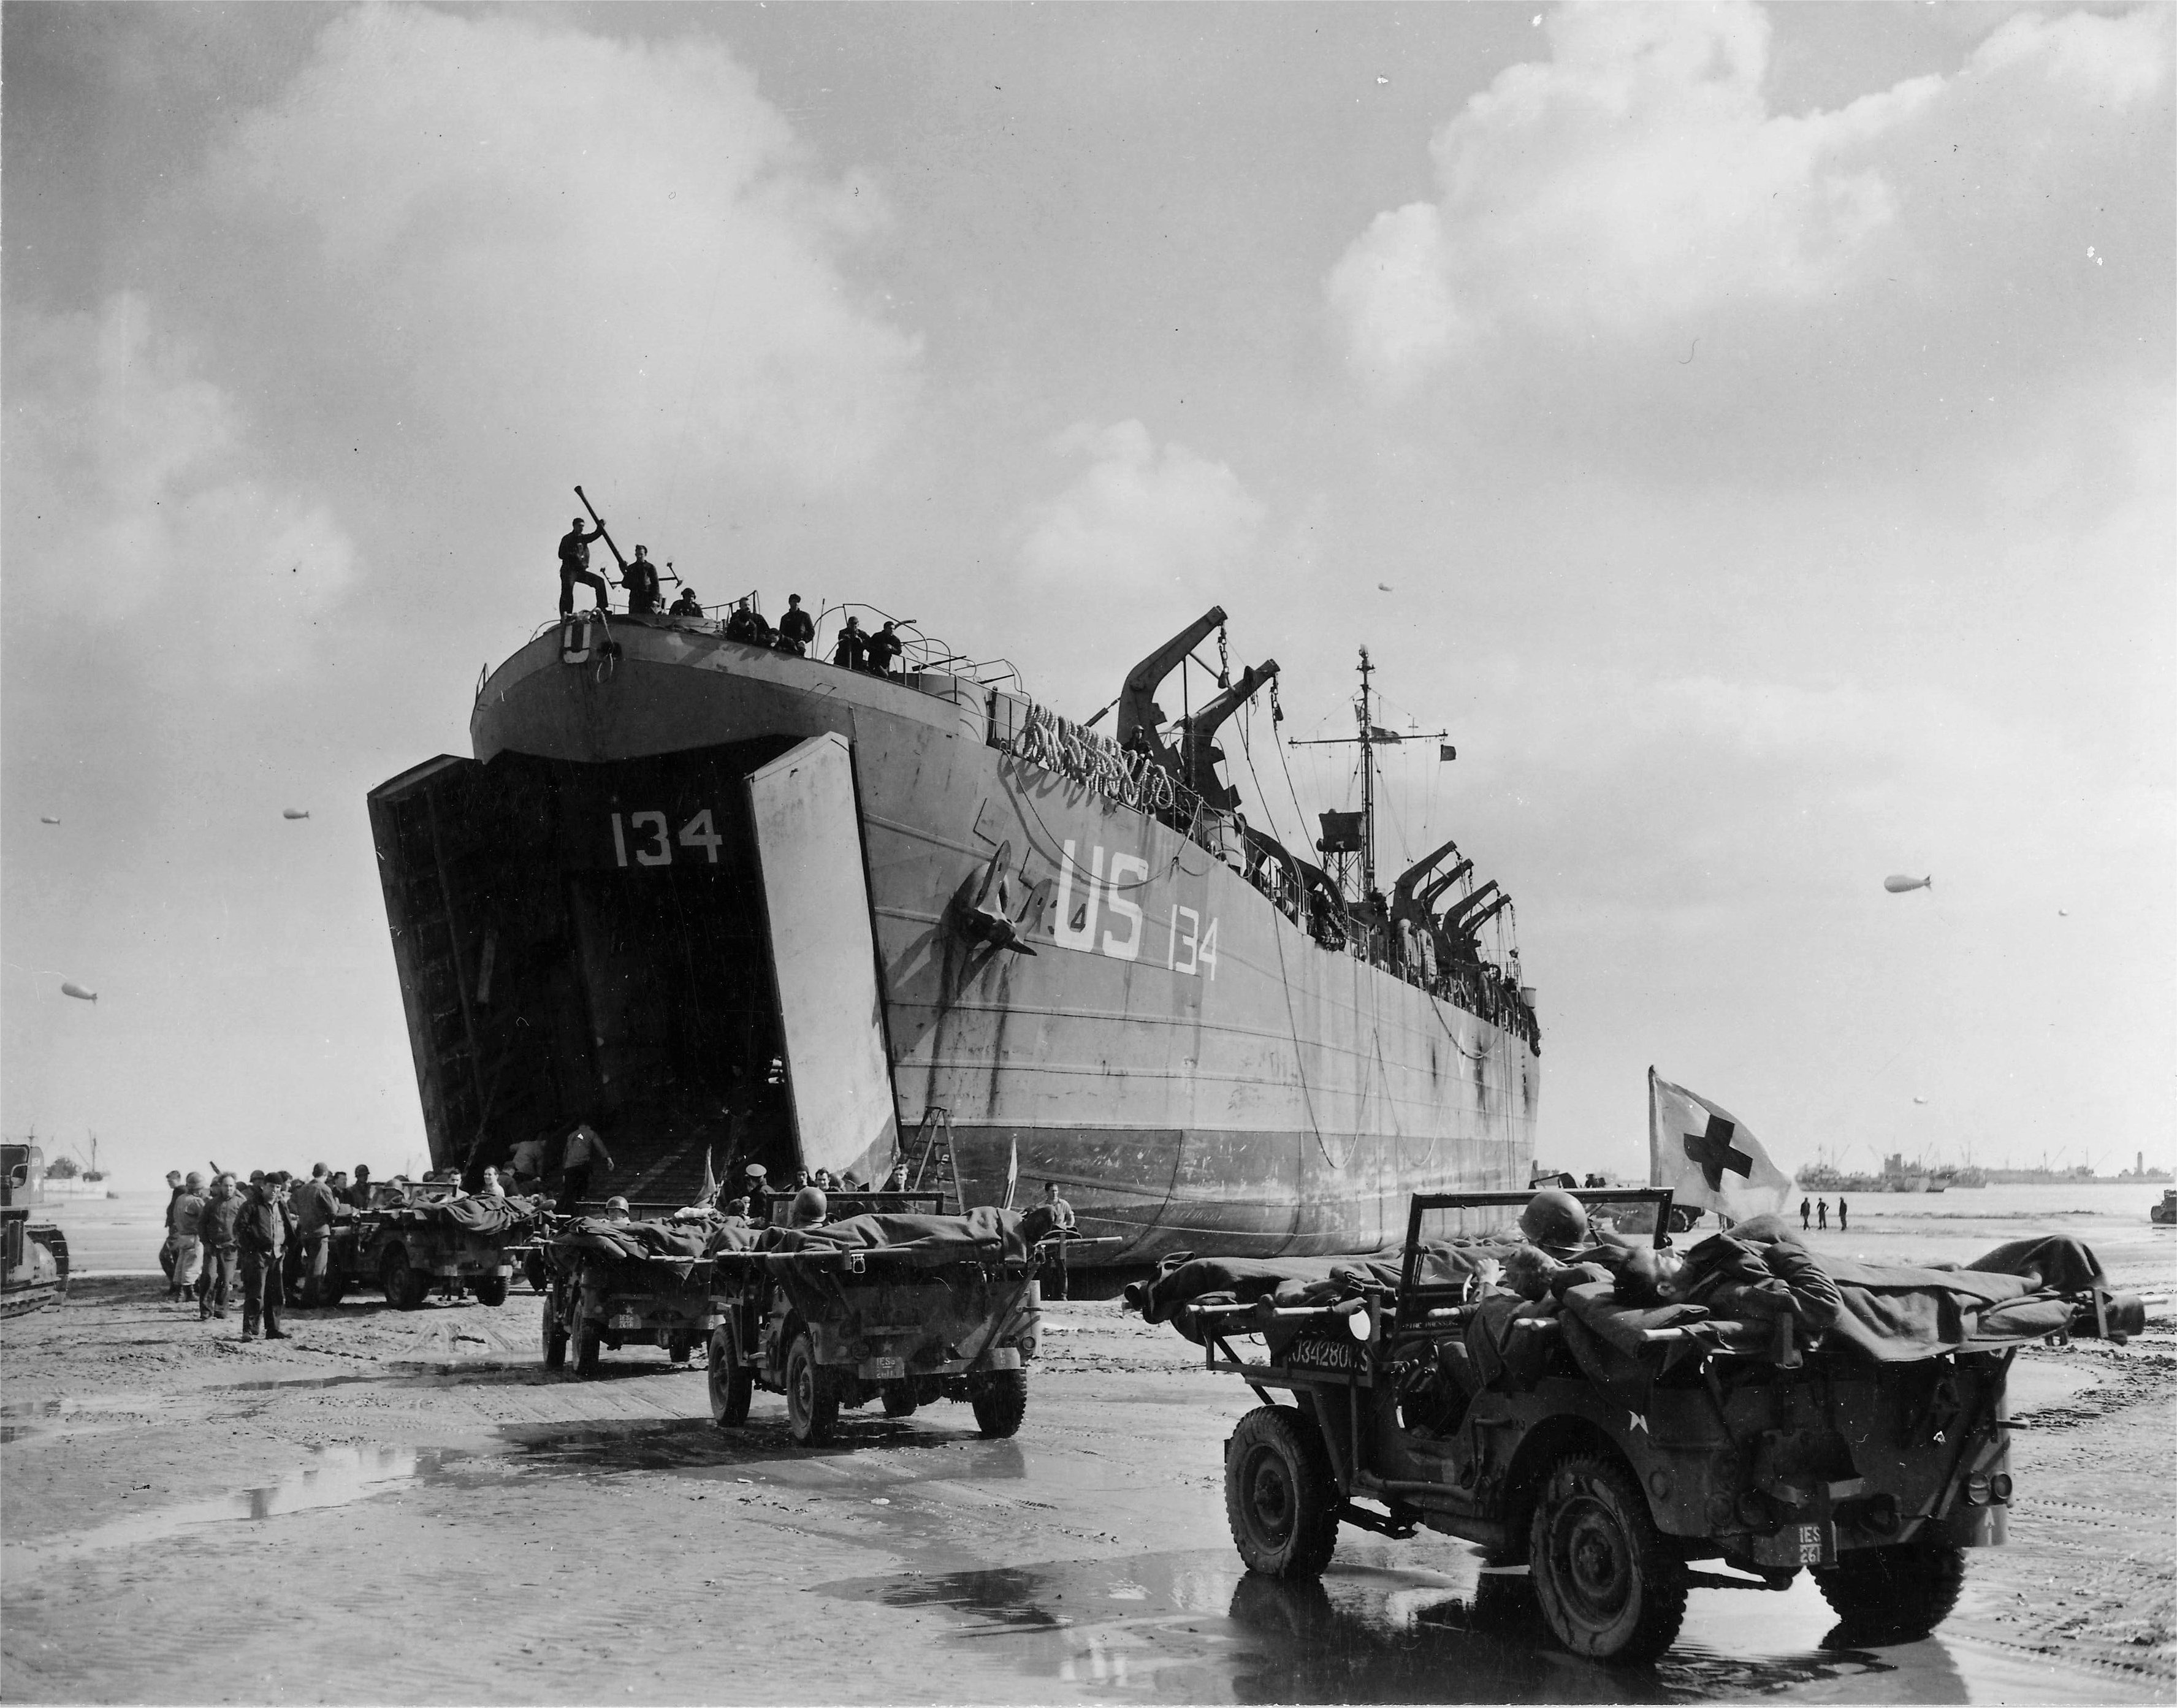 US Navy LST-134 and LST-325 beached at Normandy, France as jeeps driving along the invasion beach carry casualties to the waiting vessels, 12 Jun 1944, photo 2 of 4